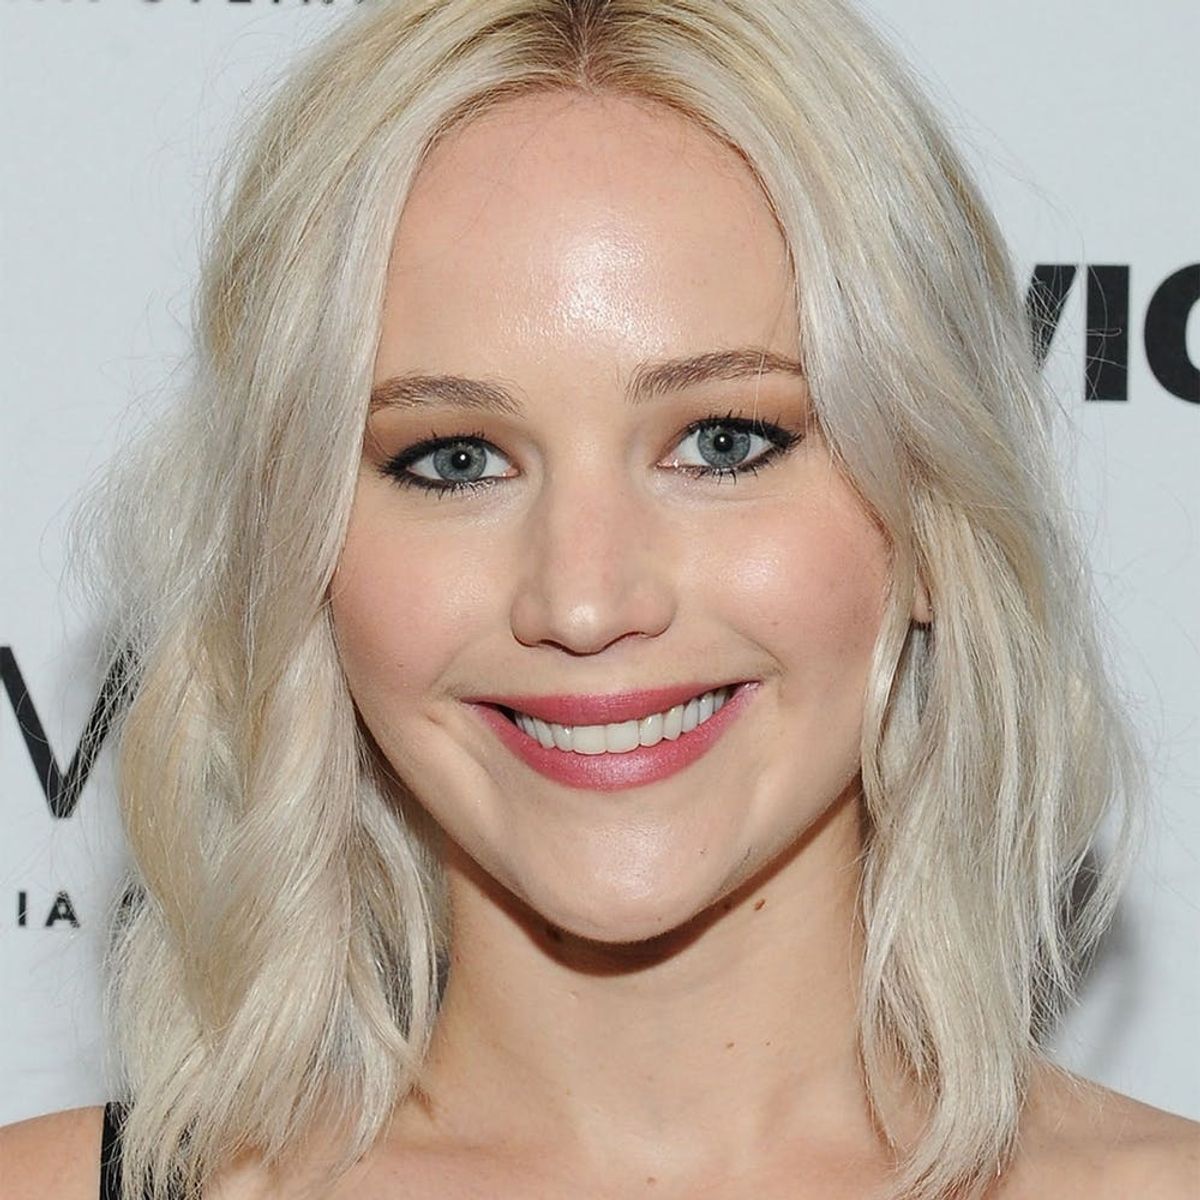 Jennifer Lawrence Just ‘Fessed Up to the Travel Mistake You Should ALWAYS Avoid